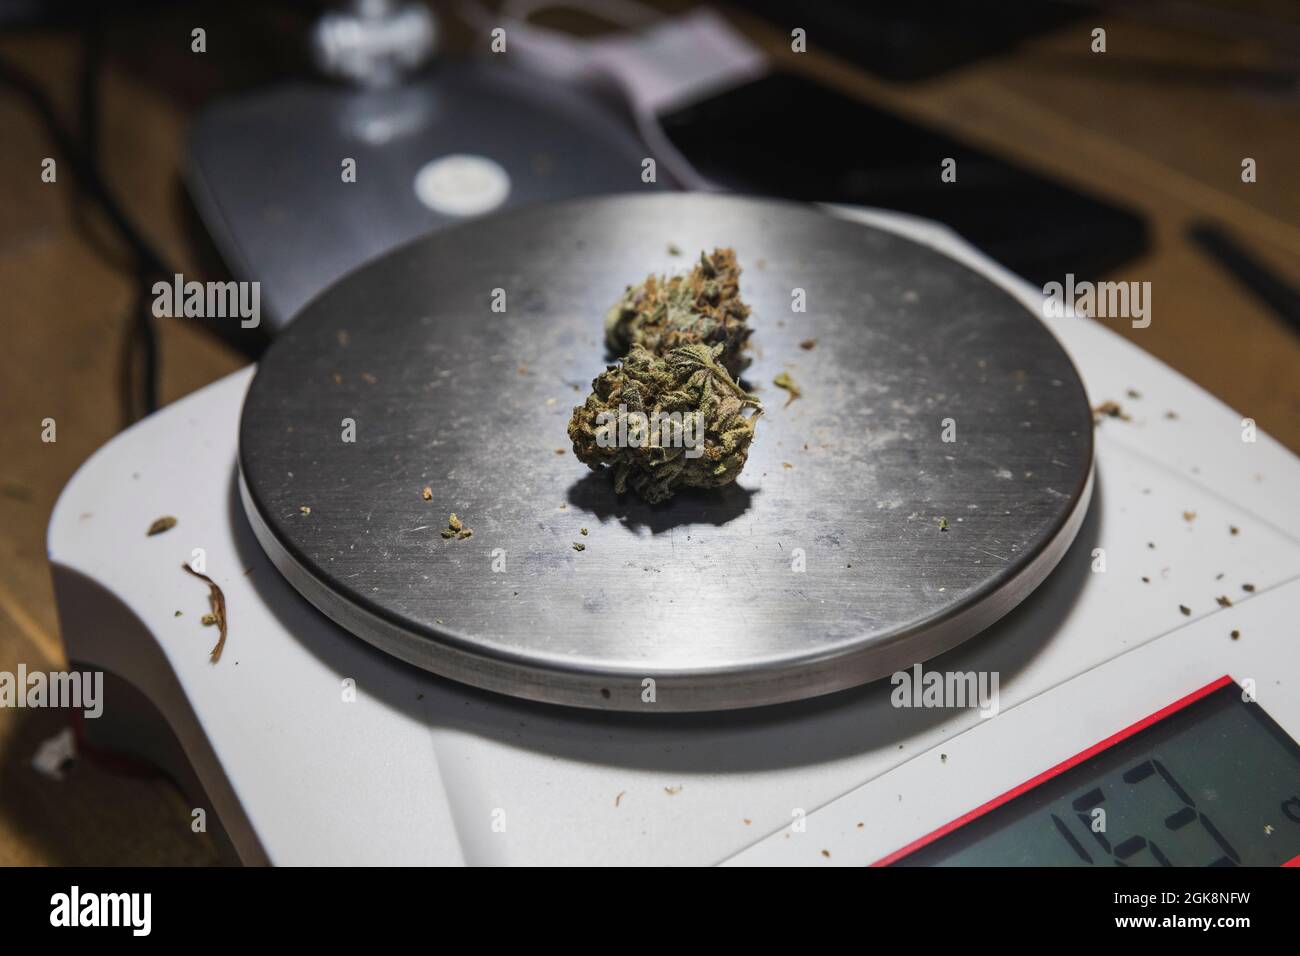 https://c8.alamy.com/comp/2GK8NFW/weighing-scales-with-dry-marijuana-floral-buds-on-table-in-room-on-blurred-background-2GK8NFW.jpg